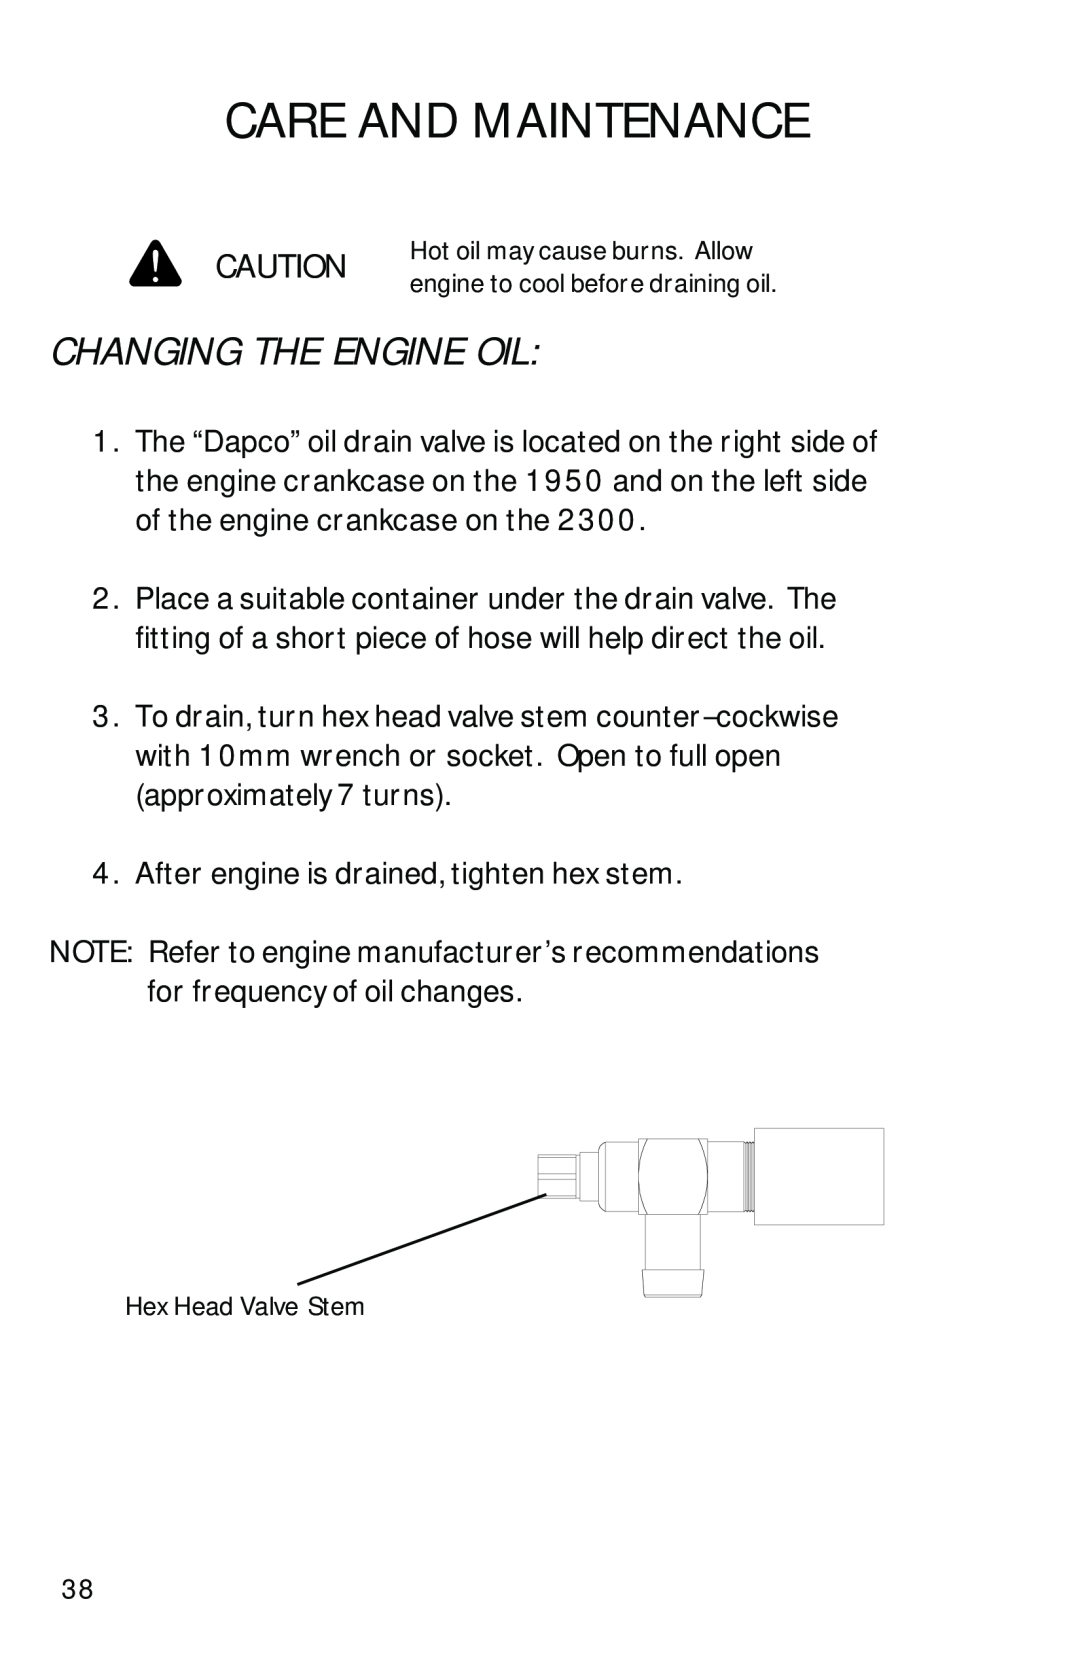 Dixon ZTR 2300 manual Changing The Engine Oil, Care And Maintenance 